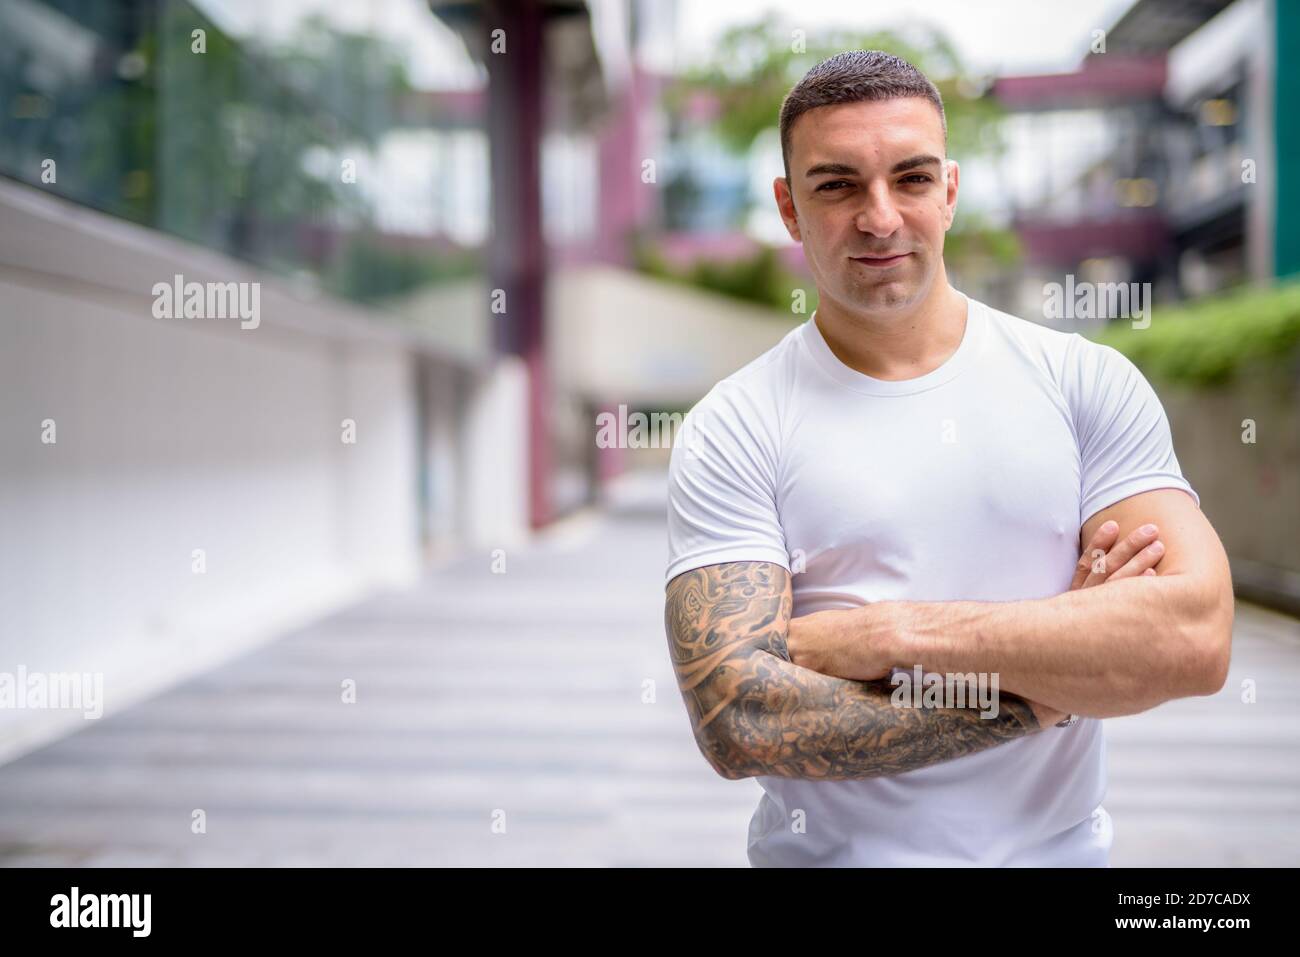 Portrait of handsome man with tattoos in the city outdoors Stock Photo